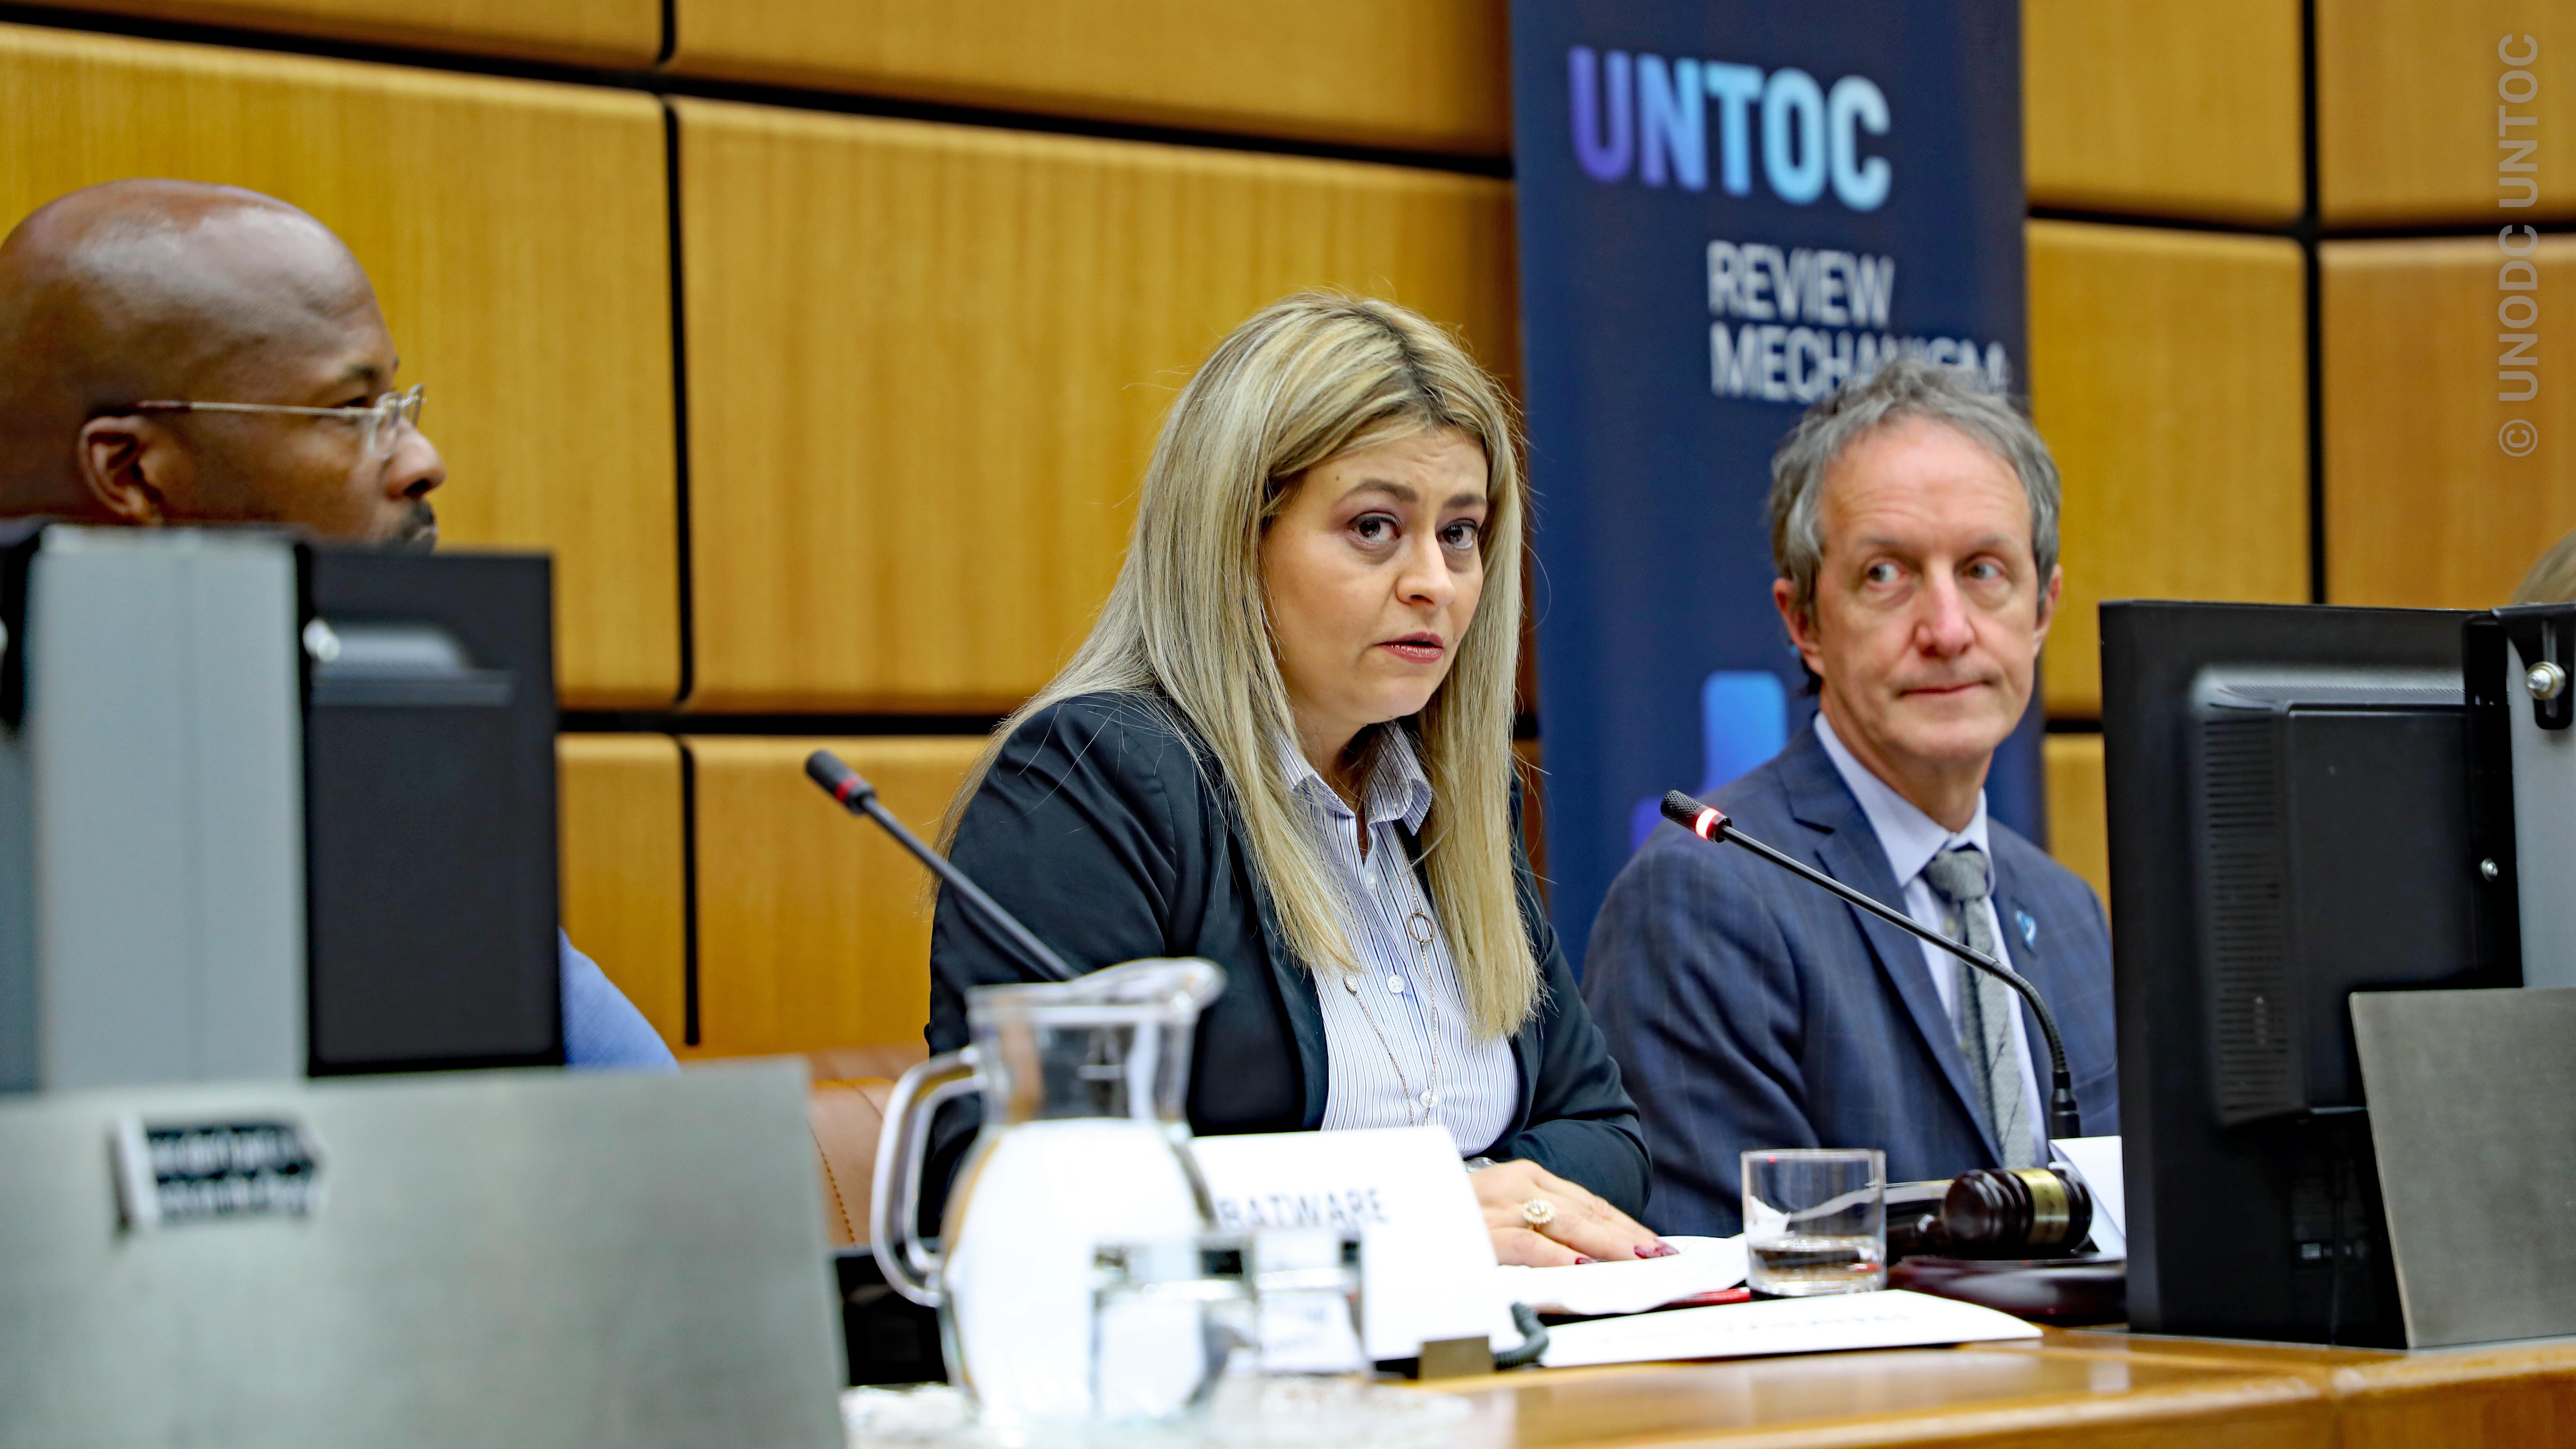 A panel with two men and a woman. The woman is speaking through a microphone. In the background, a roll up banner of the UNTOC Review Mechanism.